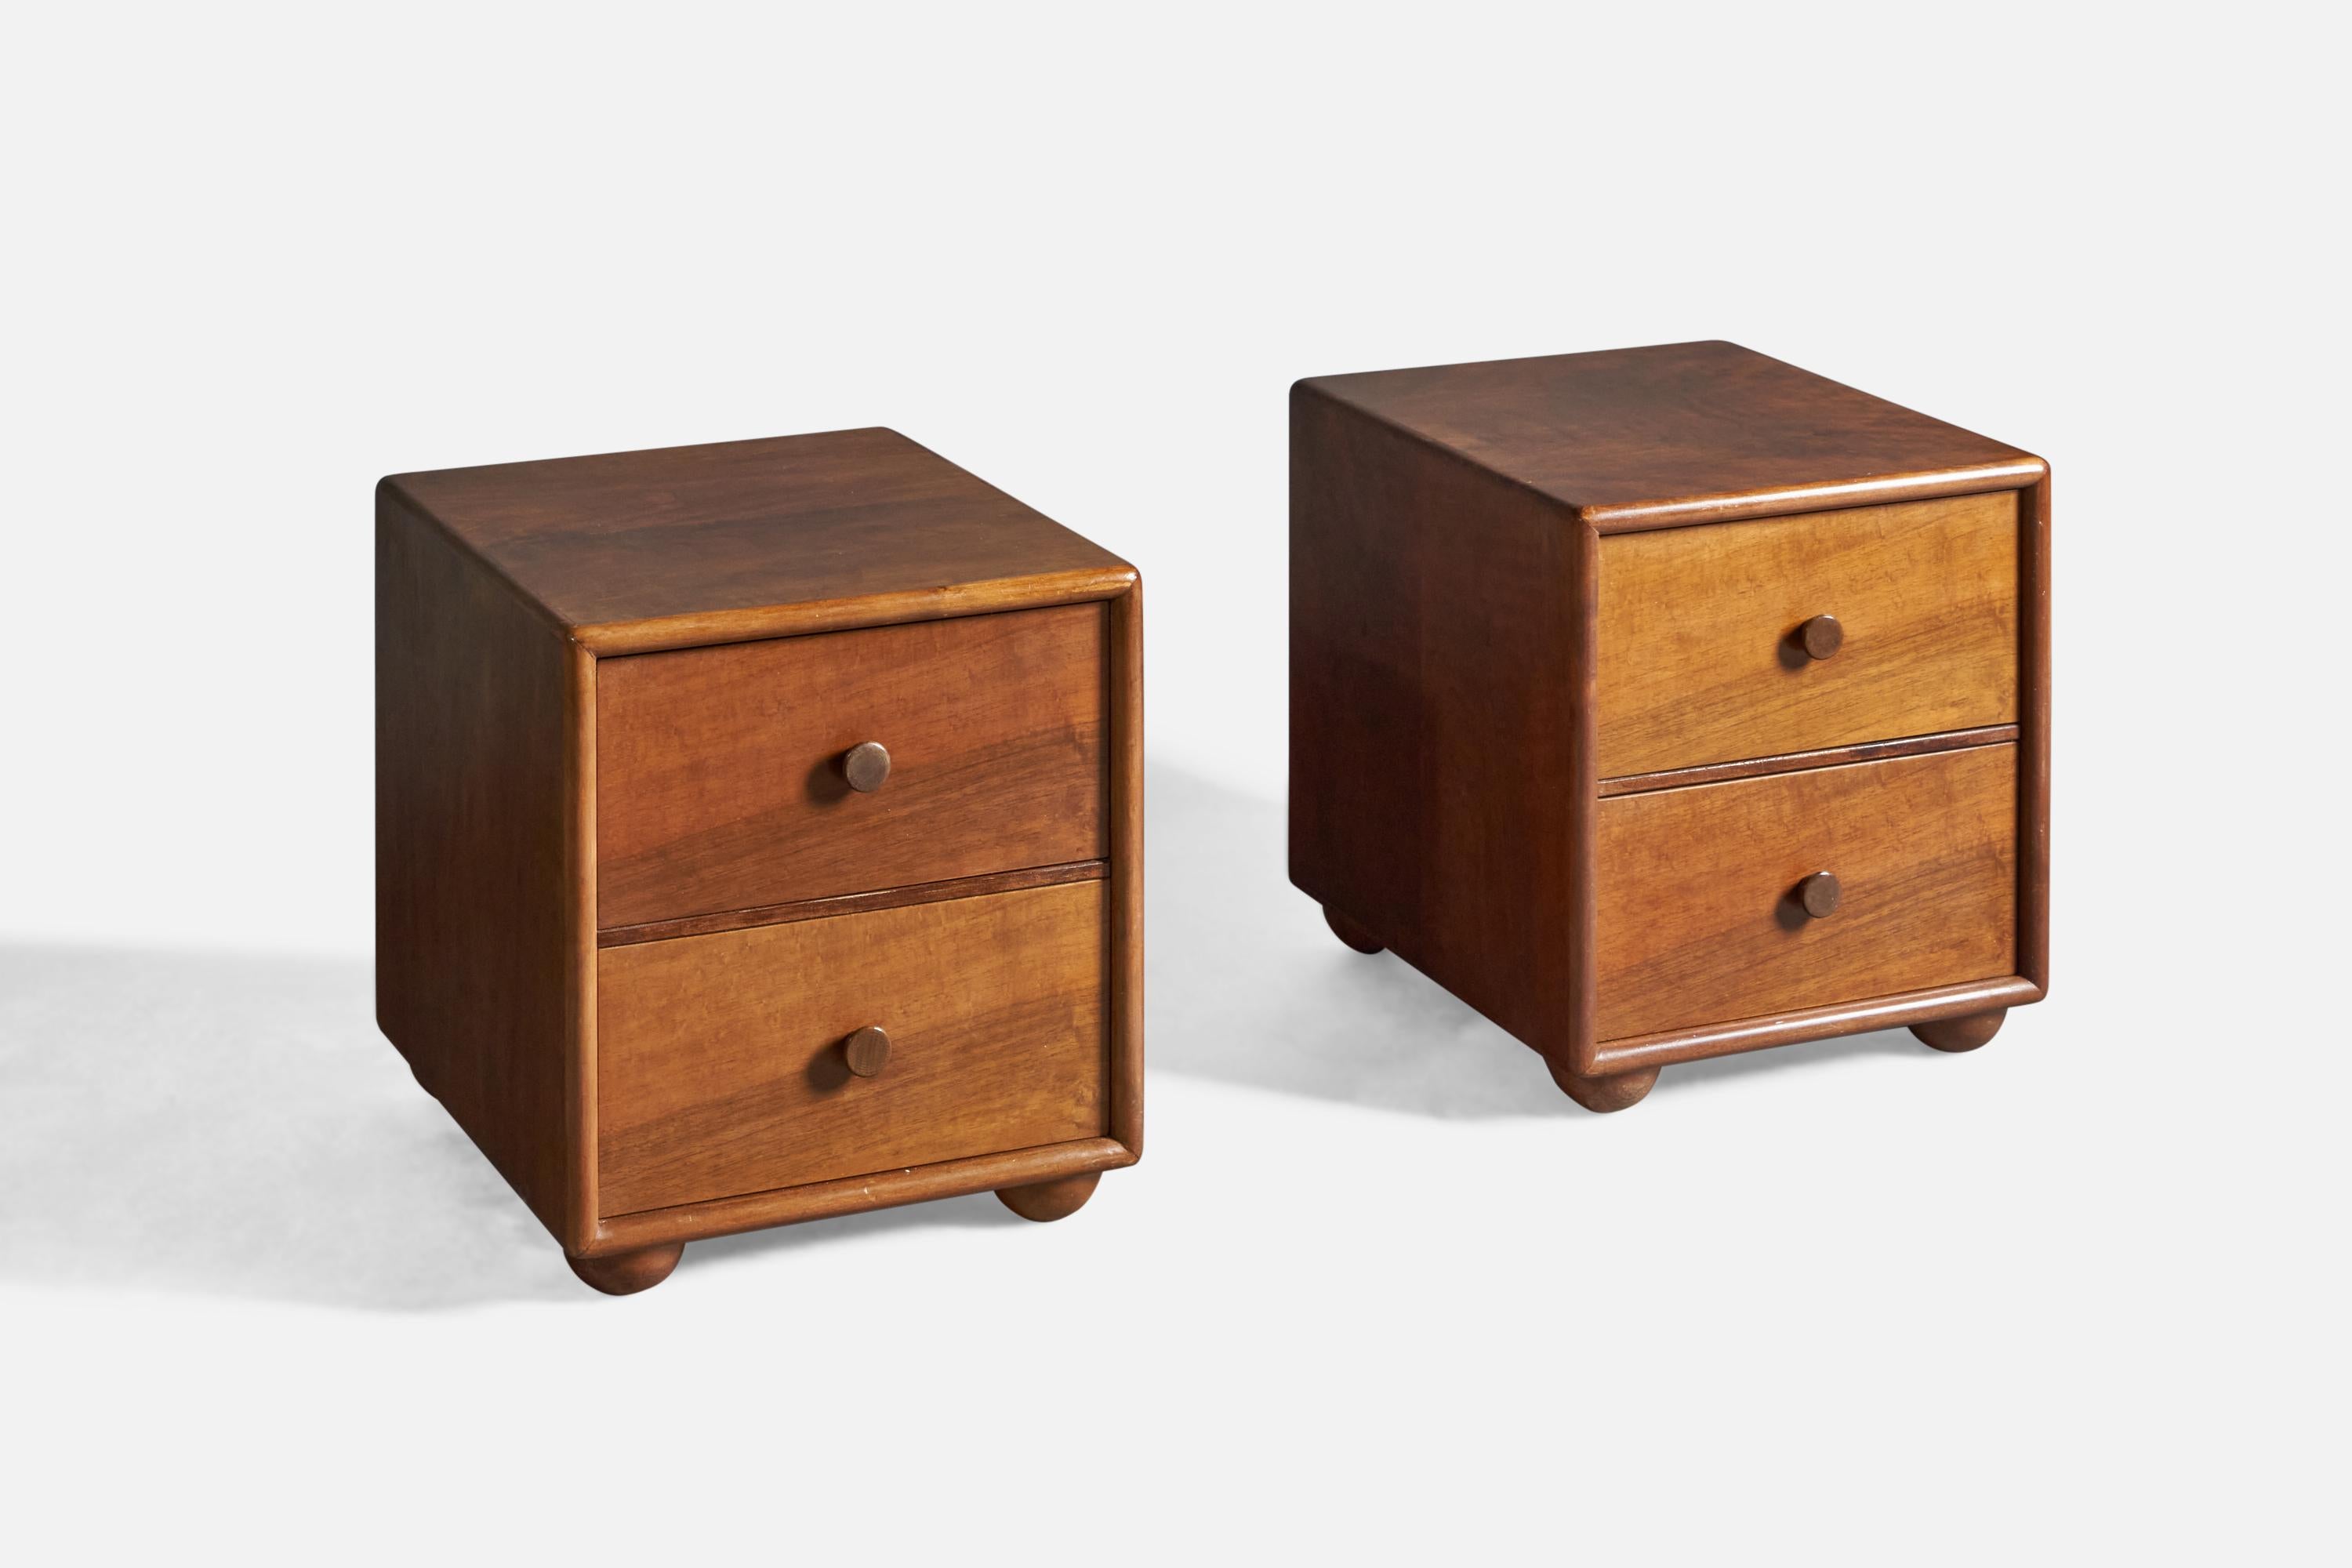 A pair of walnut nightstands or bedside cabinets, designed by Silvio Coppola and produced by Bernini, Italy, c. 1960s.